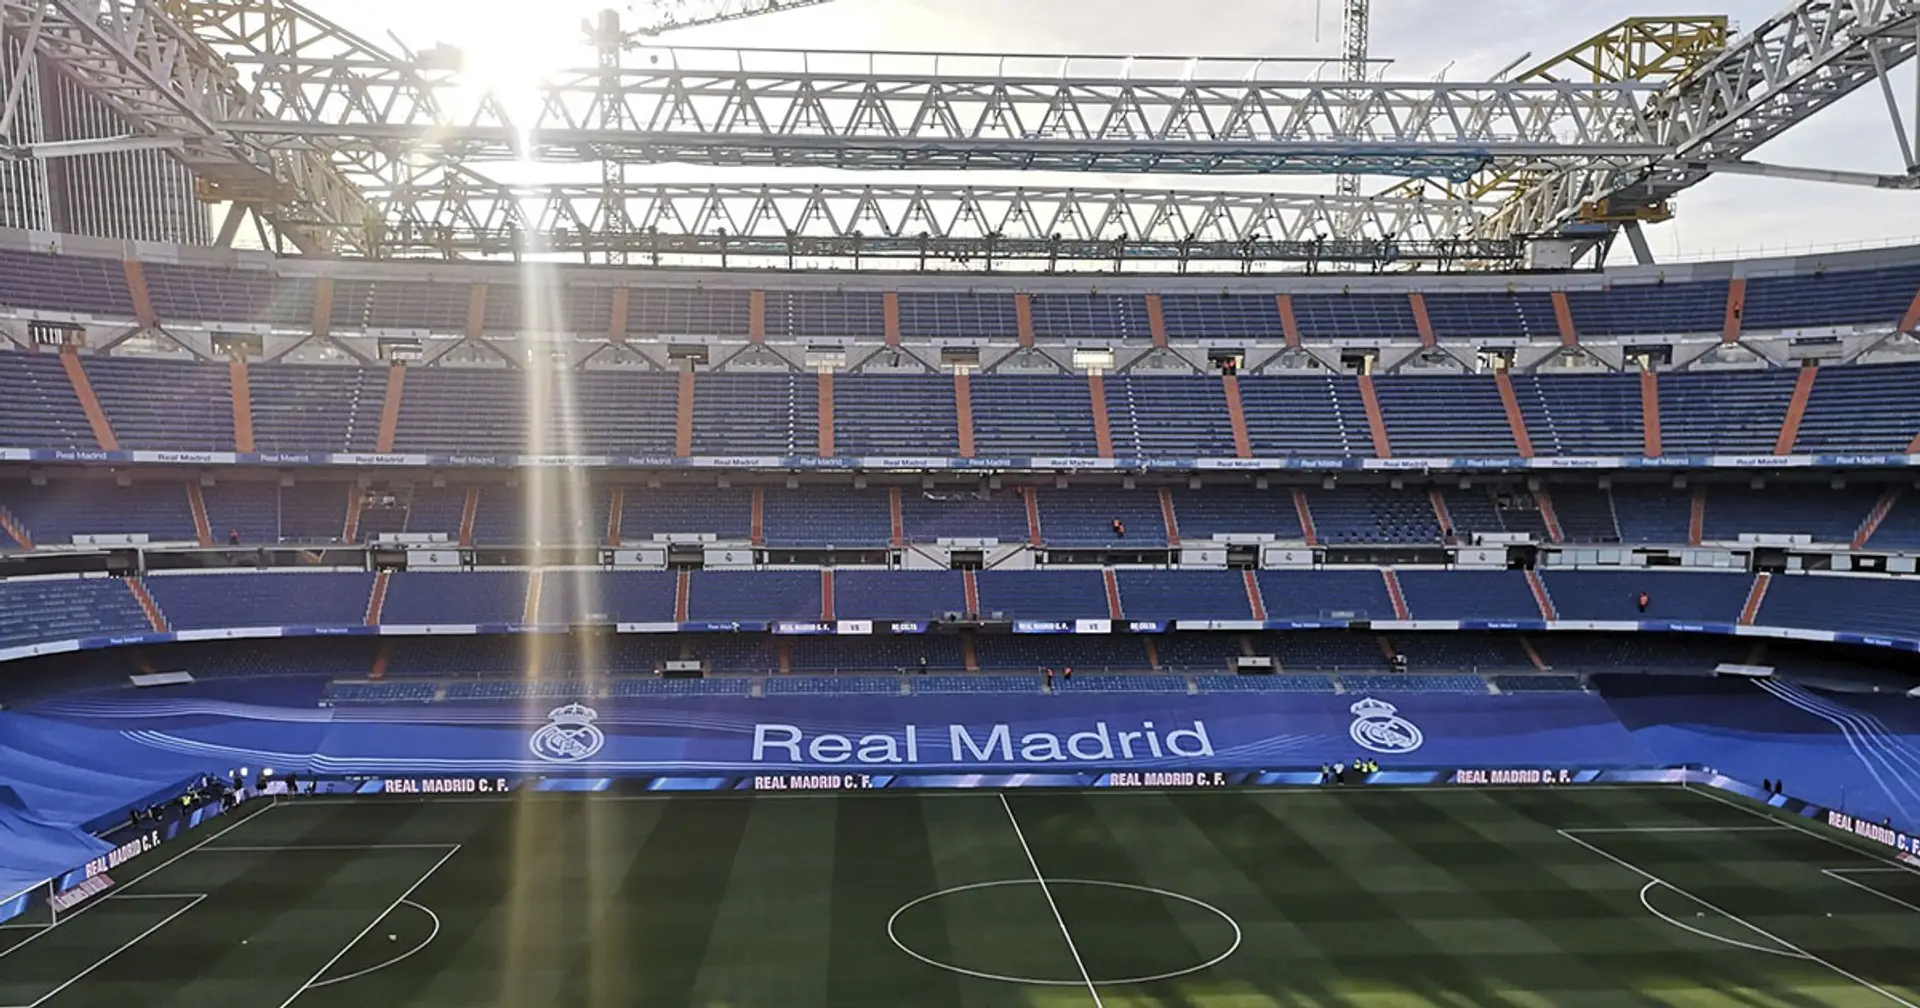 Real Madrid to pay €66m each year until 2053 as new Bernabeu costs revealed